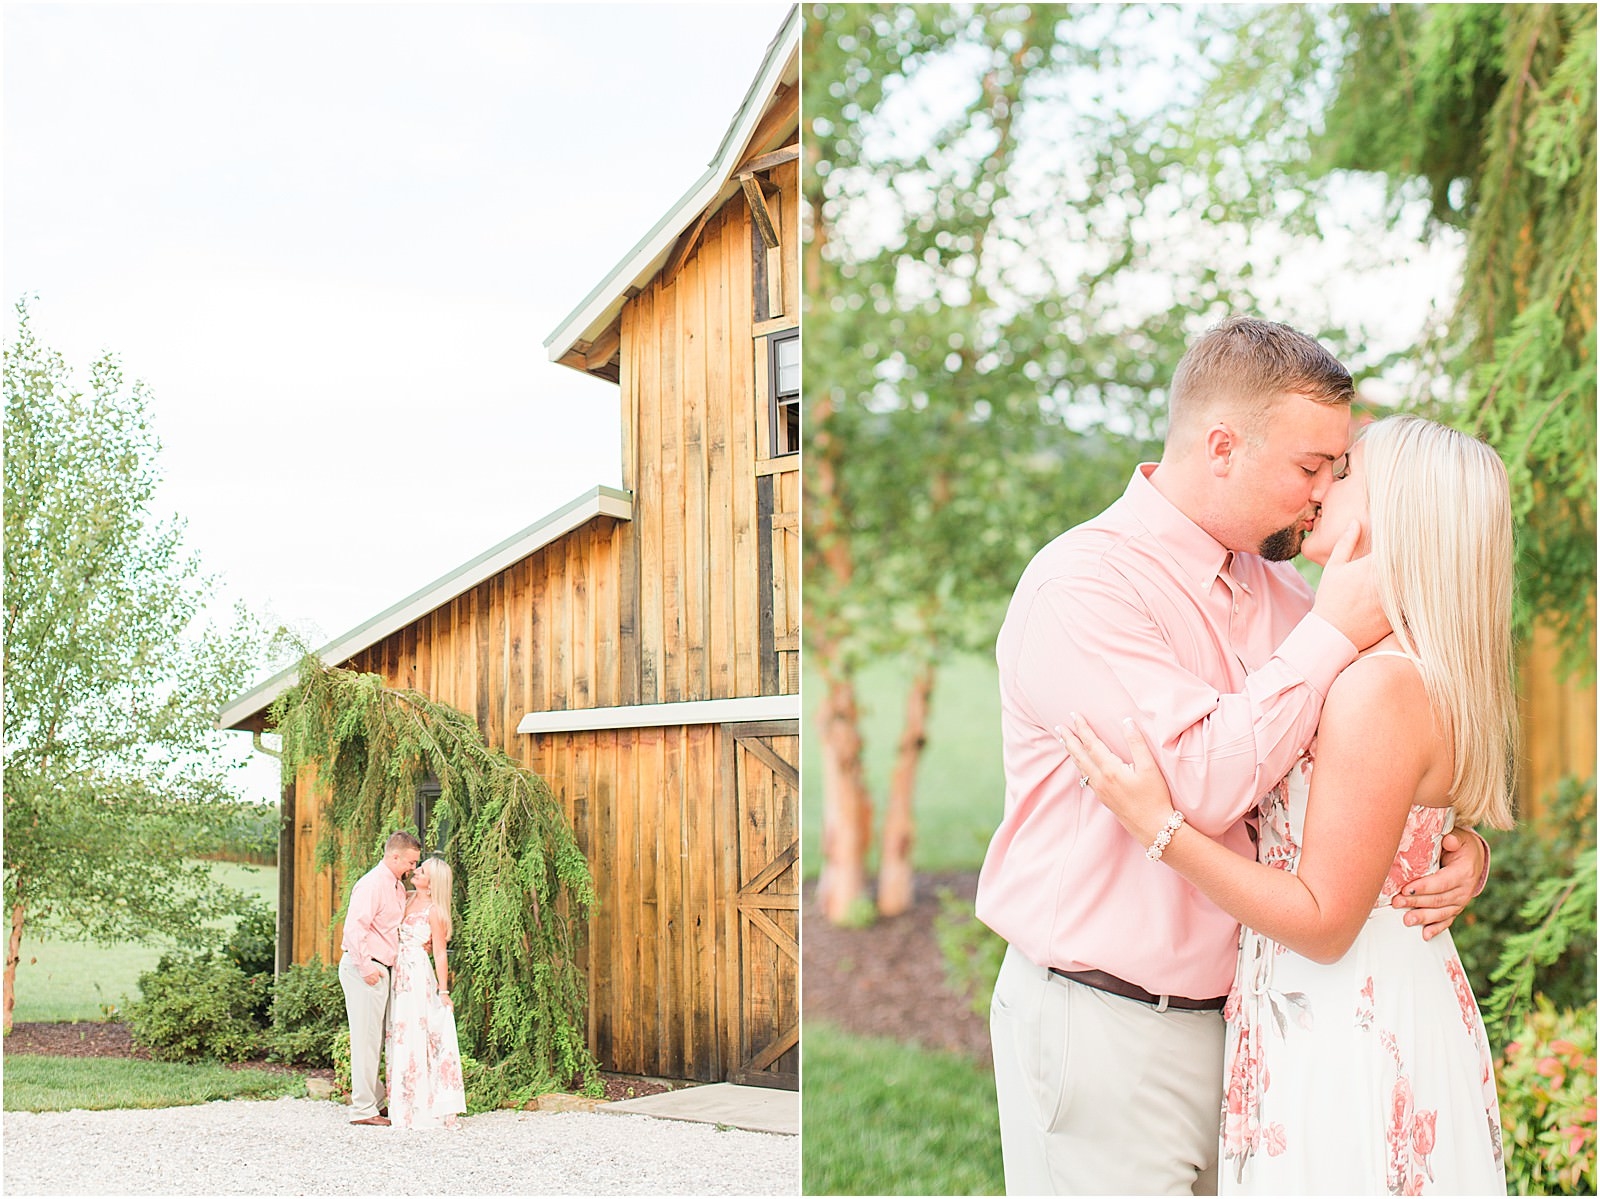 Lauren and Bryce | The Corner House B&ed and Breakfast Engagement Session | Bret and Brandie Photography 018.jpg